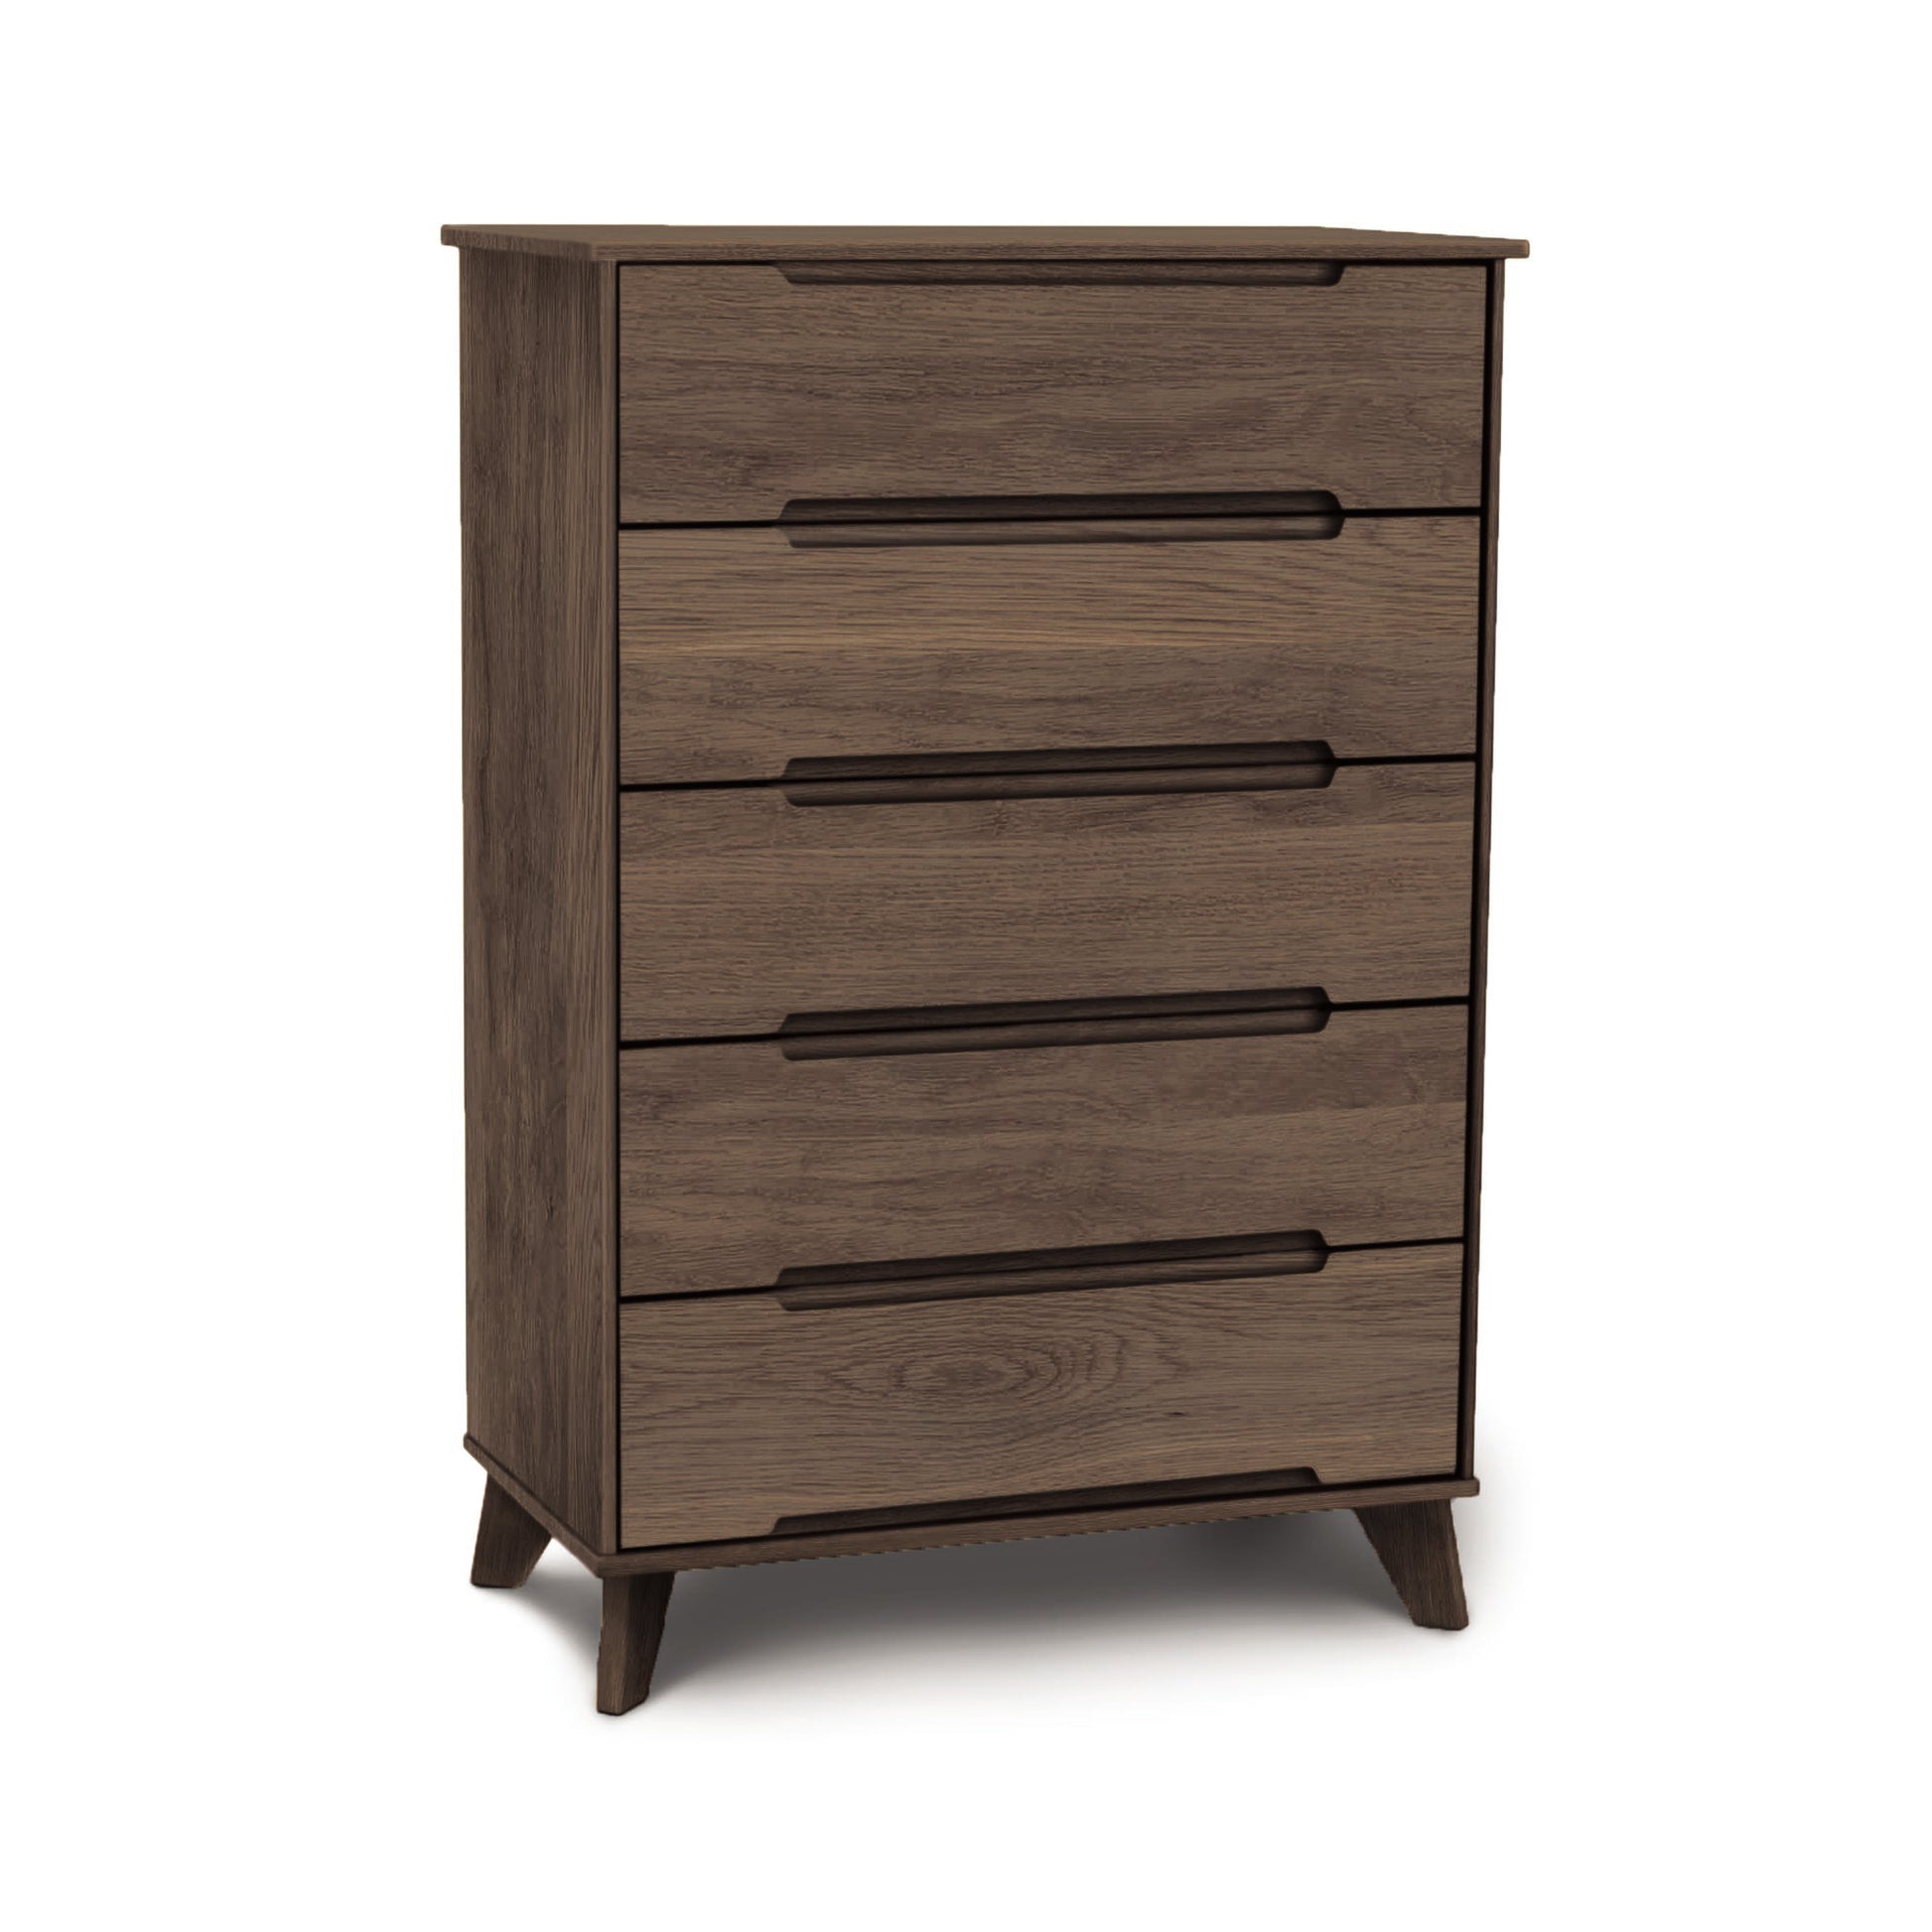 An upcycled Linn 5-Drawer Wide Chest made by Copeland Furniture from sustainable hardwood in a dark brown color.